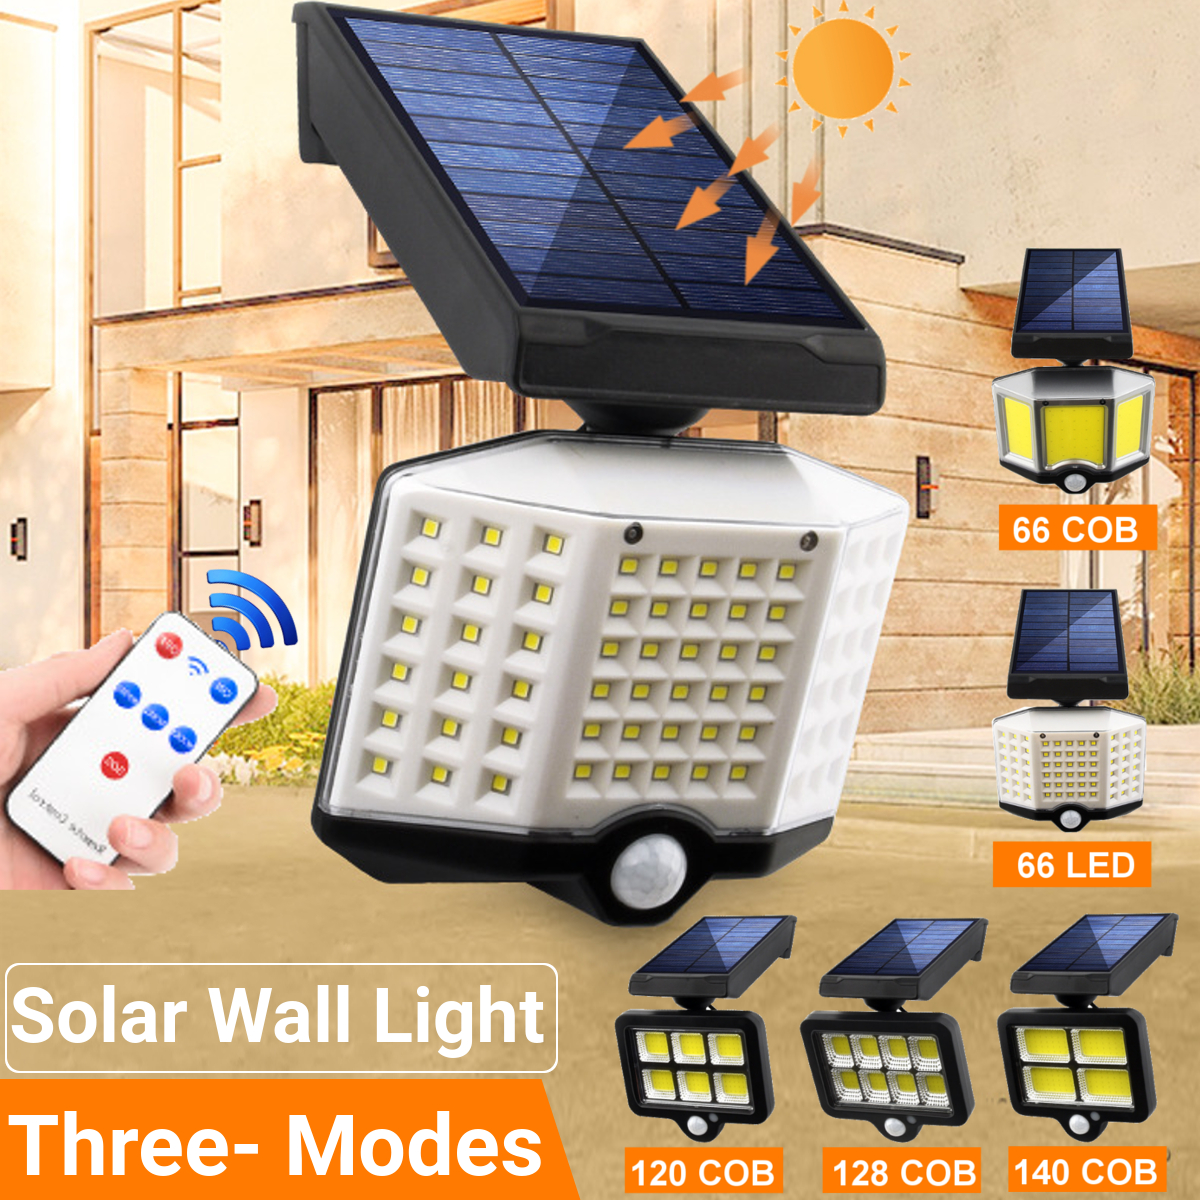 20W-IP67-Waterproof-Outdoor-Solar-Powered-LED-Wall-Solar-Light-for-Home-Garden-Solar-Lamp-1788211-1